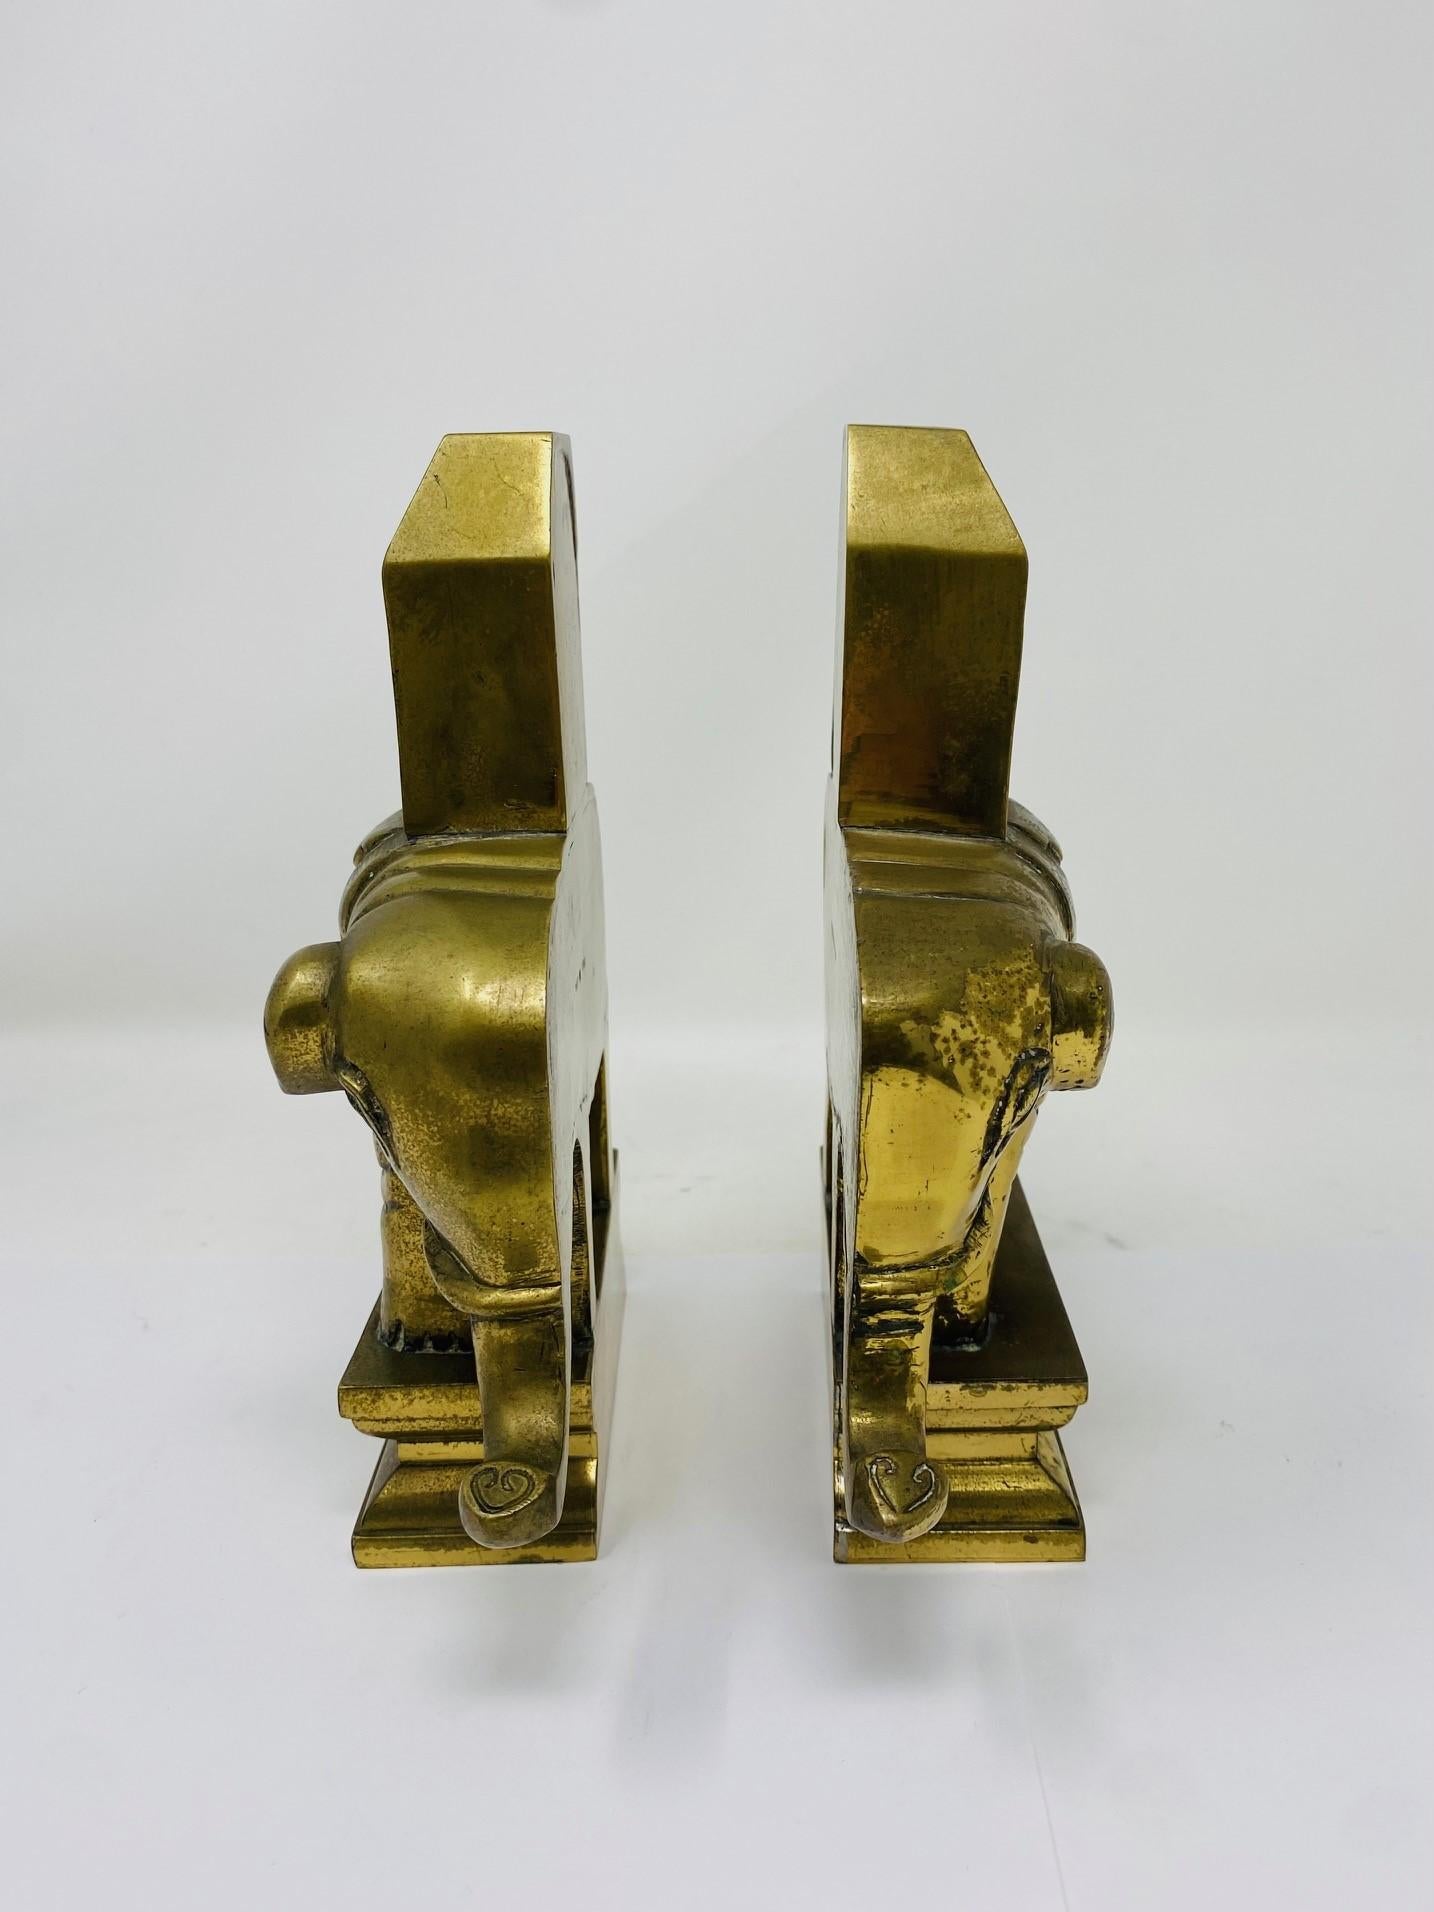 Vintage 1940s Pair of Sculptural Elephant Bookends in Solid Brass For Sale 2